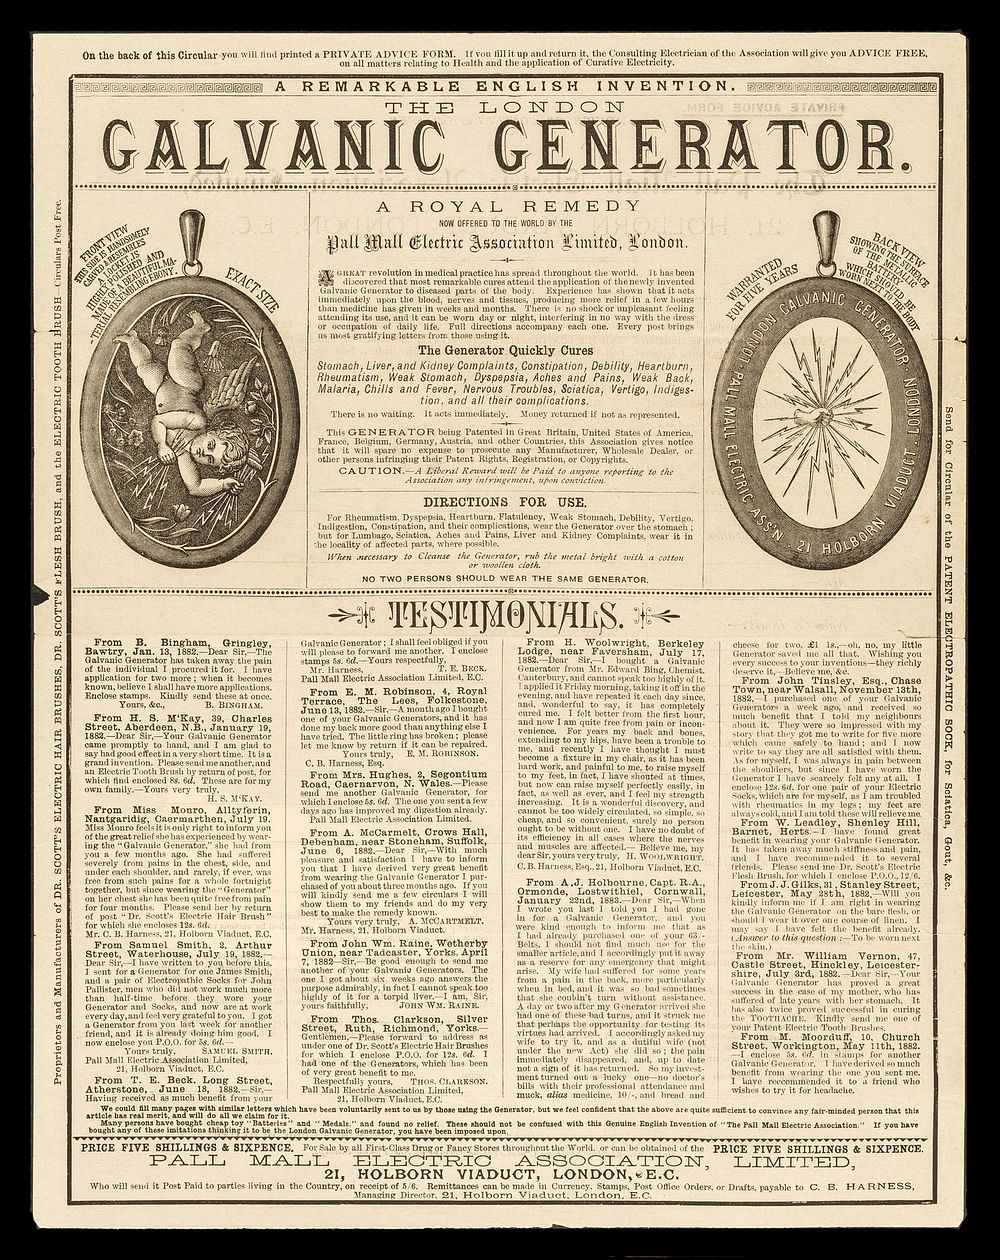 The London galvanic generator : a remarkable English invention : a royal remedy now offered to the world / by the Pall Mall…